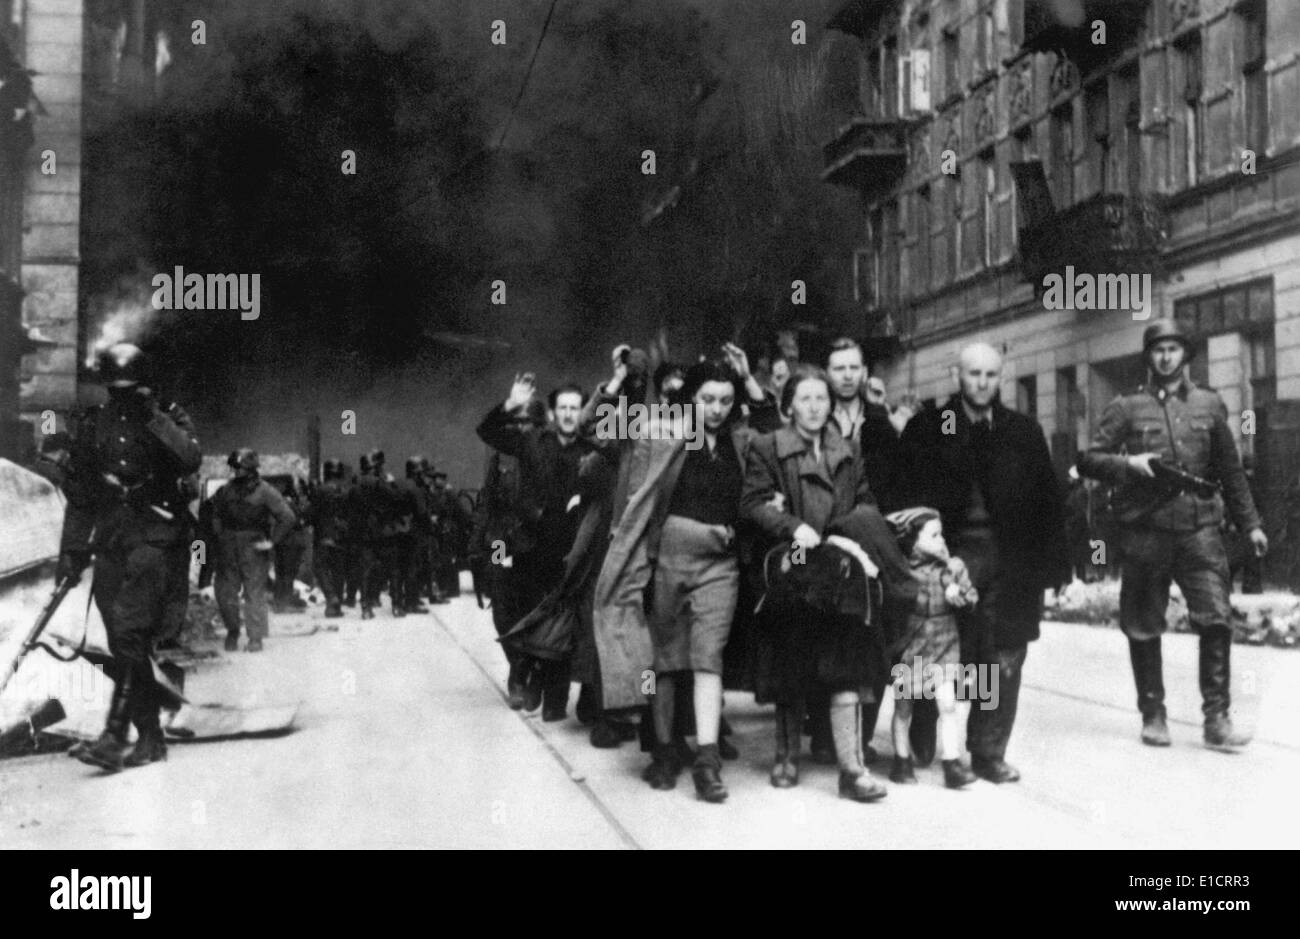 Jewish civilians 'forcibly pulled out of dug-outs' by Germans during the Warsaw Ghetto Uprising, April 19-May 16, 1943. Photo Stock Photo